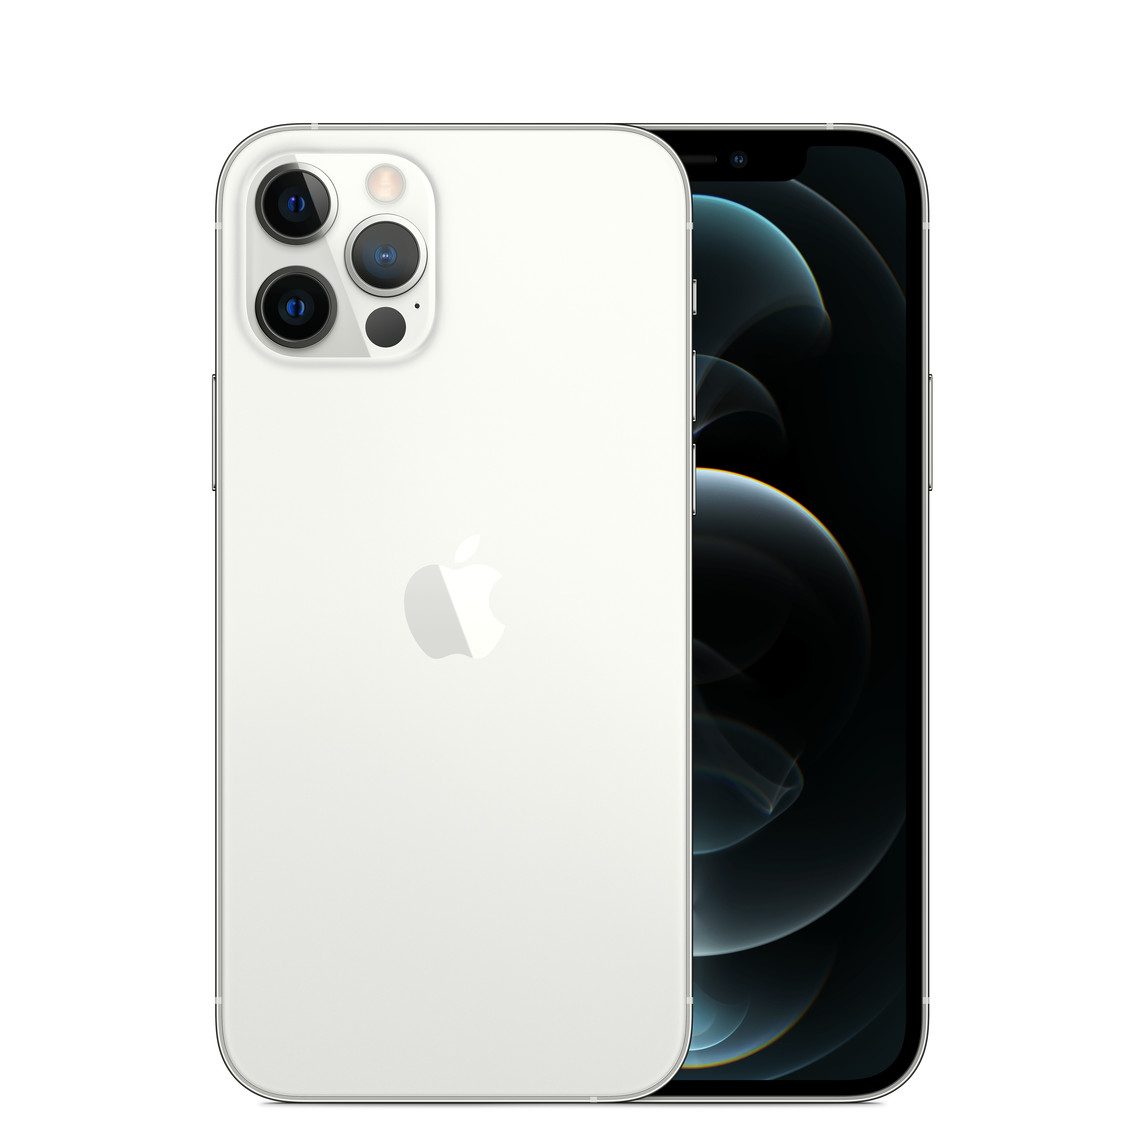 Silver iPhone 12 Pro, Pro camera system with True Tone flash, lidar, microphone, centered Apple logo, front, all-screen display